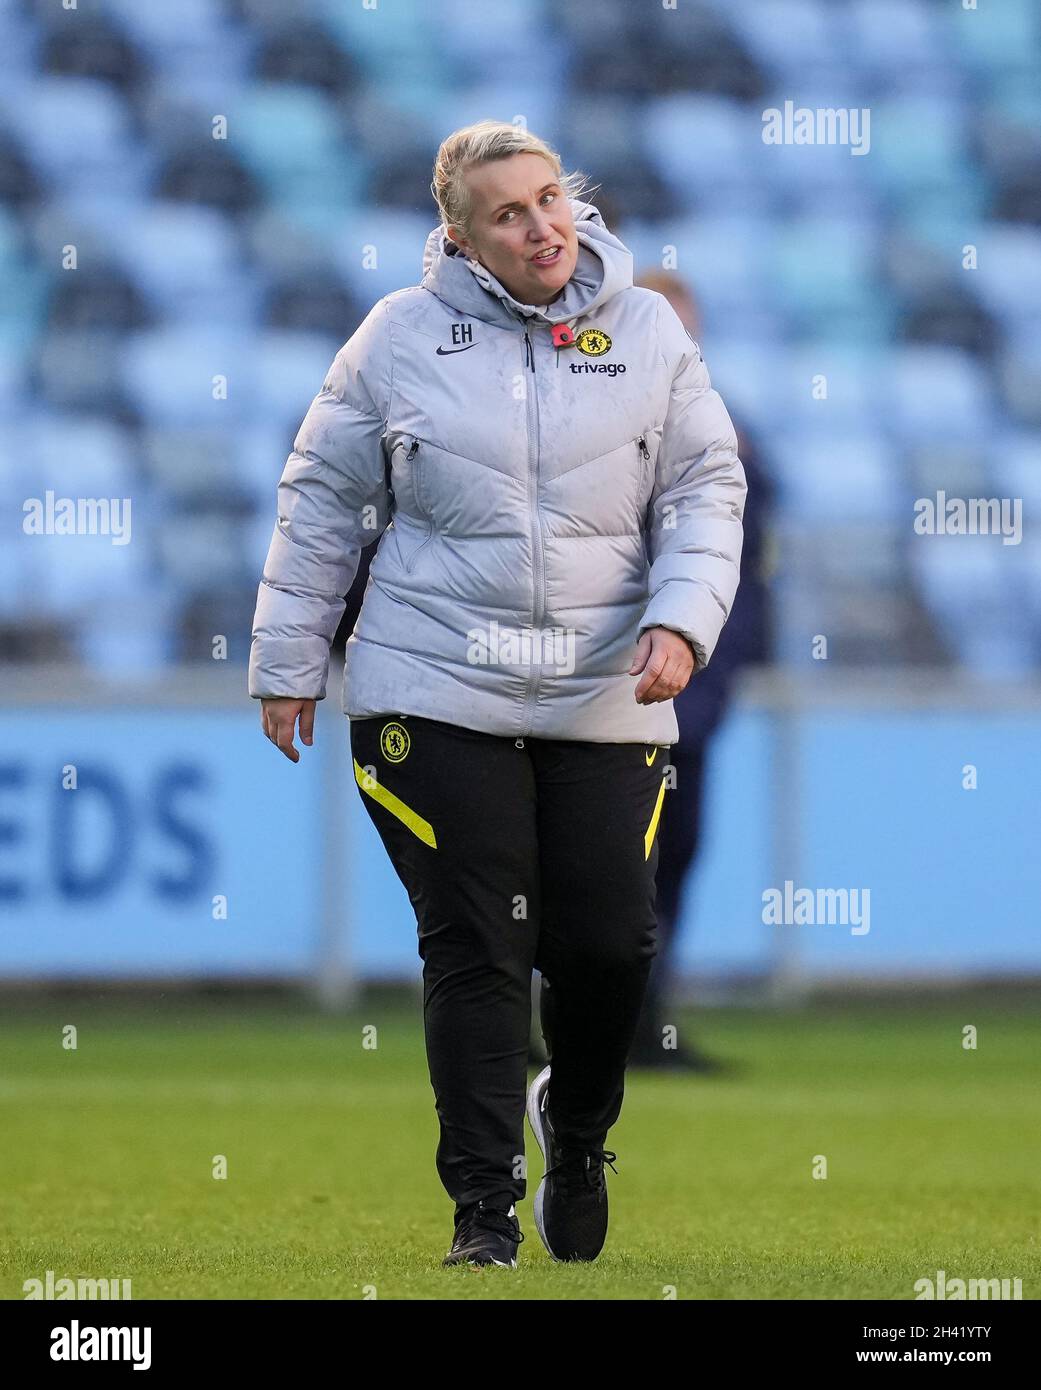 Manchester, UK. 31st Oct, 2021. Chelsea Women manager Emma Hayes at full time during the Women's FA Cup semi-final match between Manchester City Women and Chelsea Women at Academy Stadium, Manchester, United Kingdom on 31 October 2021. Photo by Andy Rowland. Credit: PRiME Media Images/Alamy Live News Stock Photo